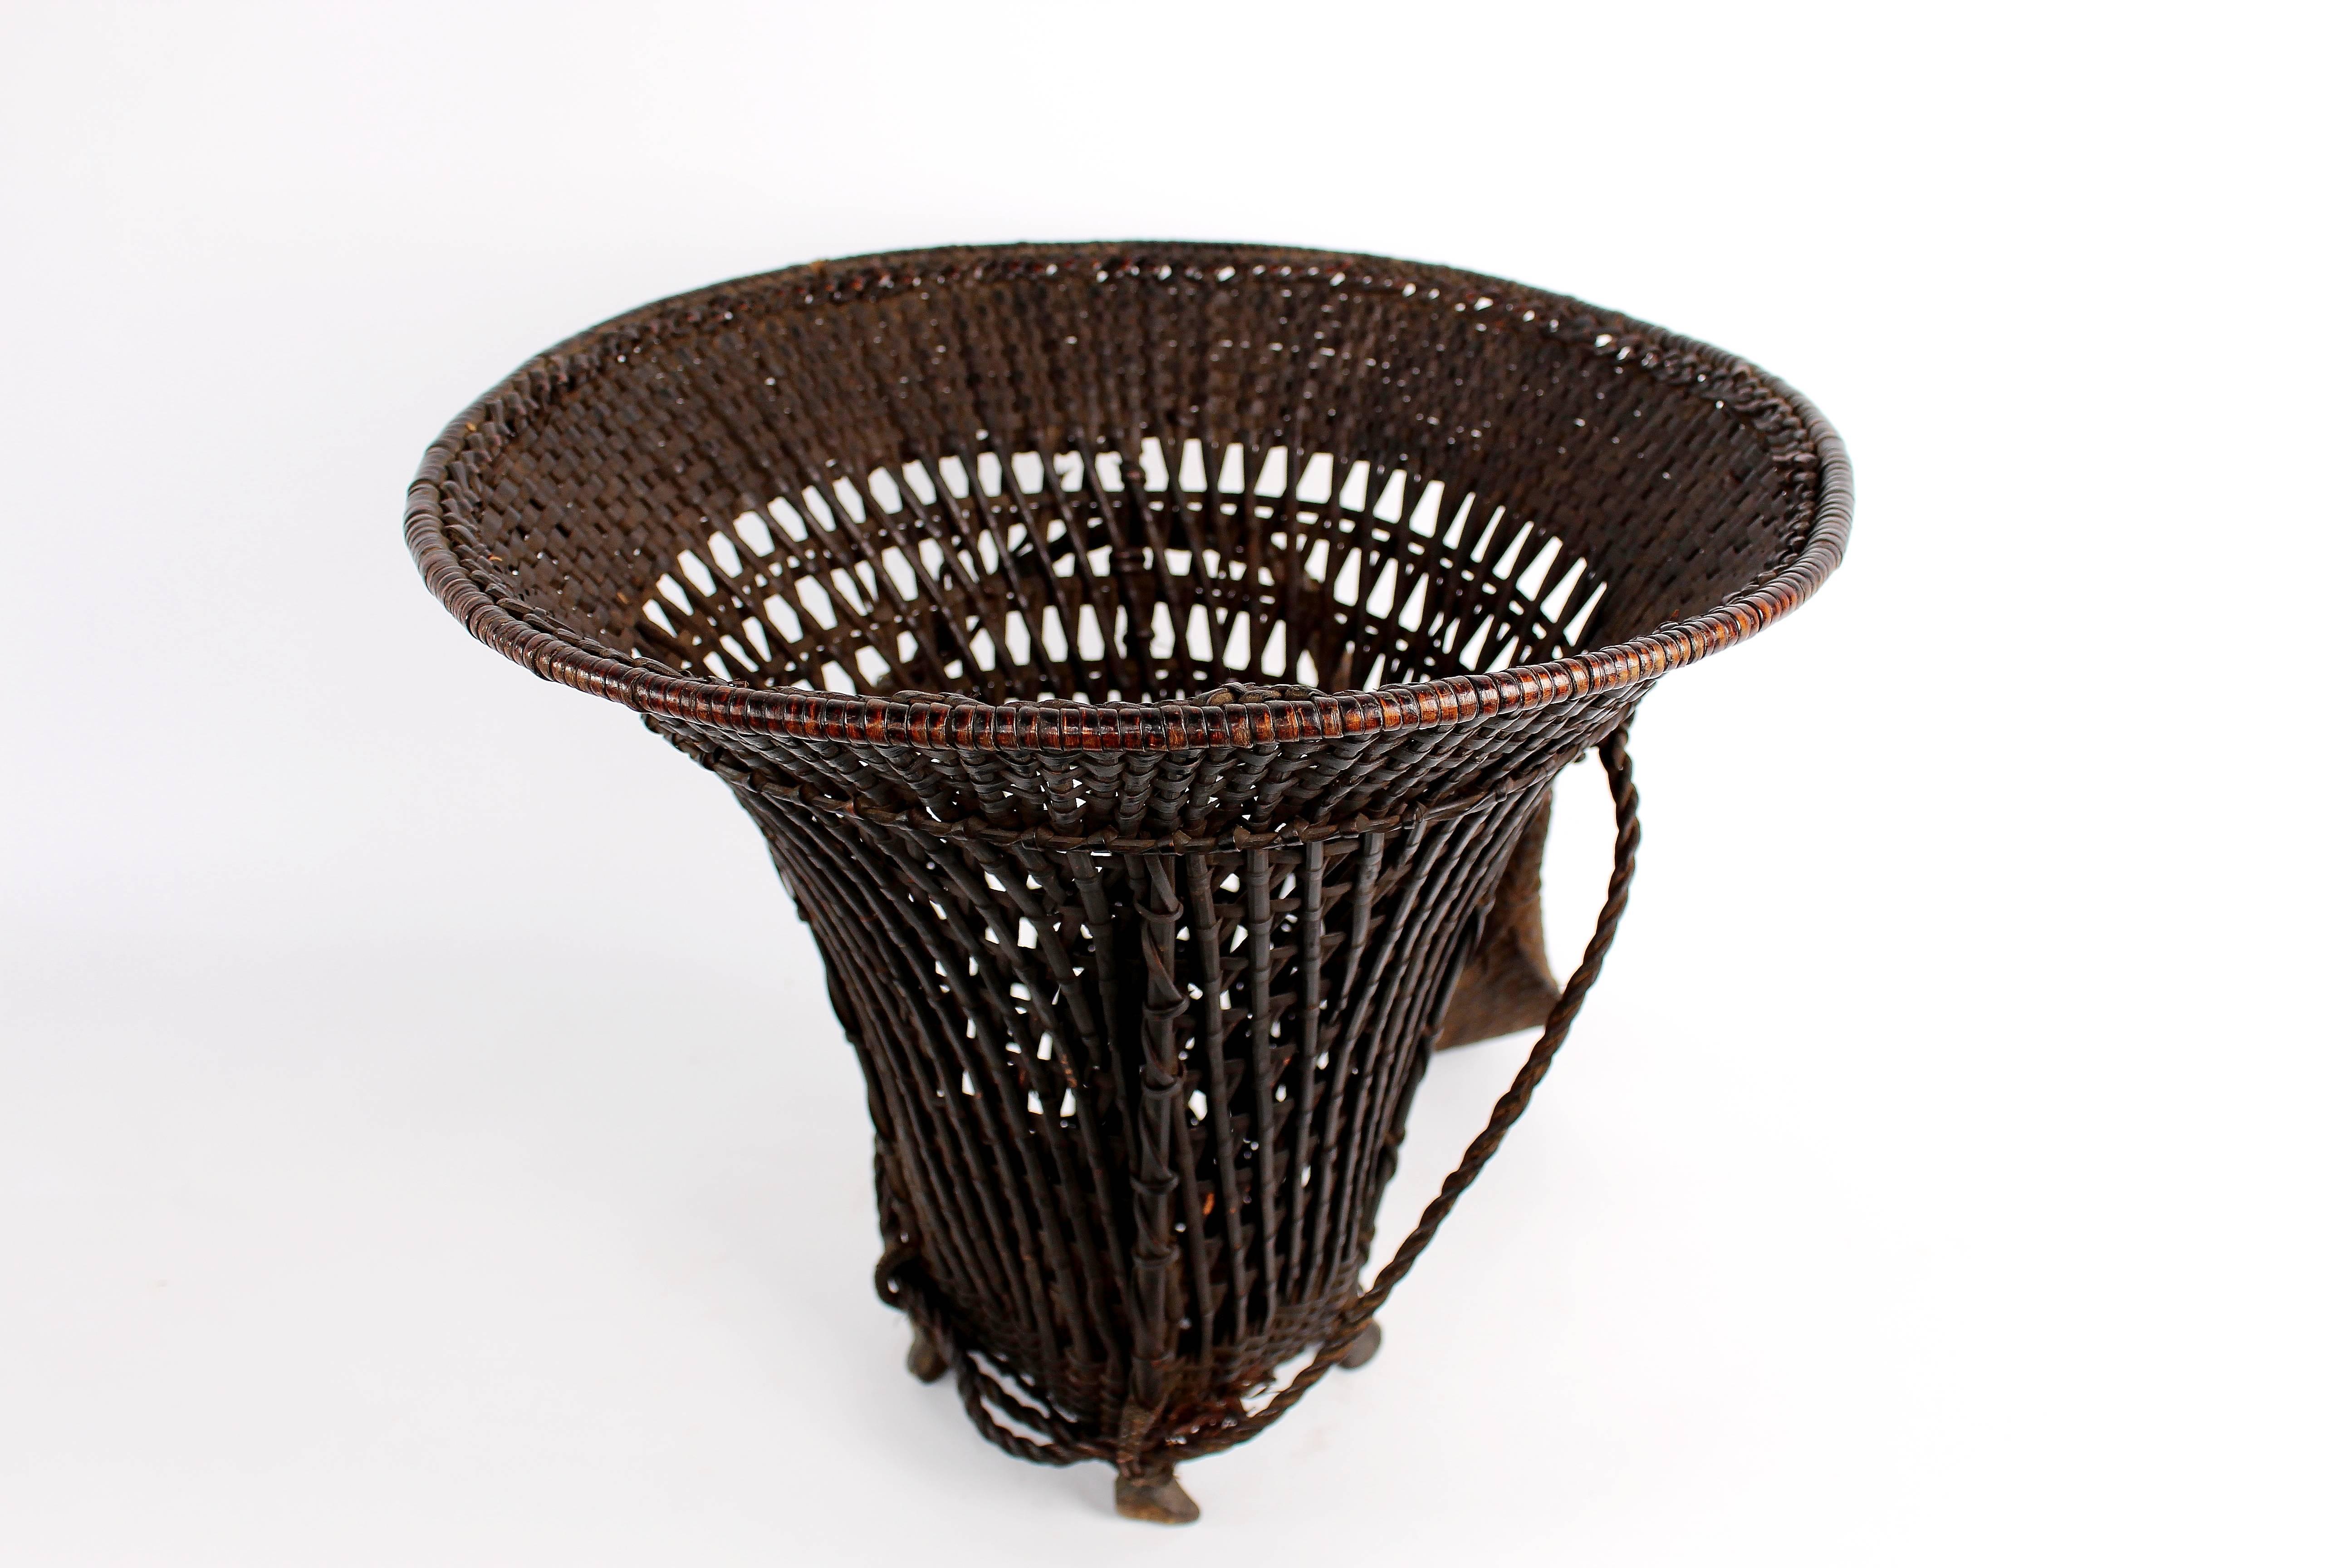 Indian Woven Carrying Basket with Forehead Strap